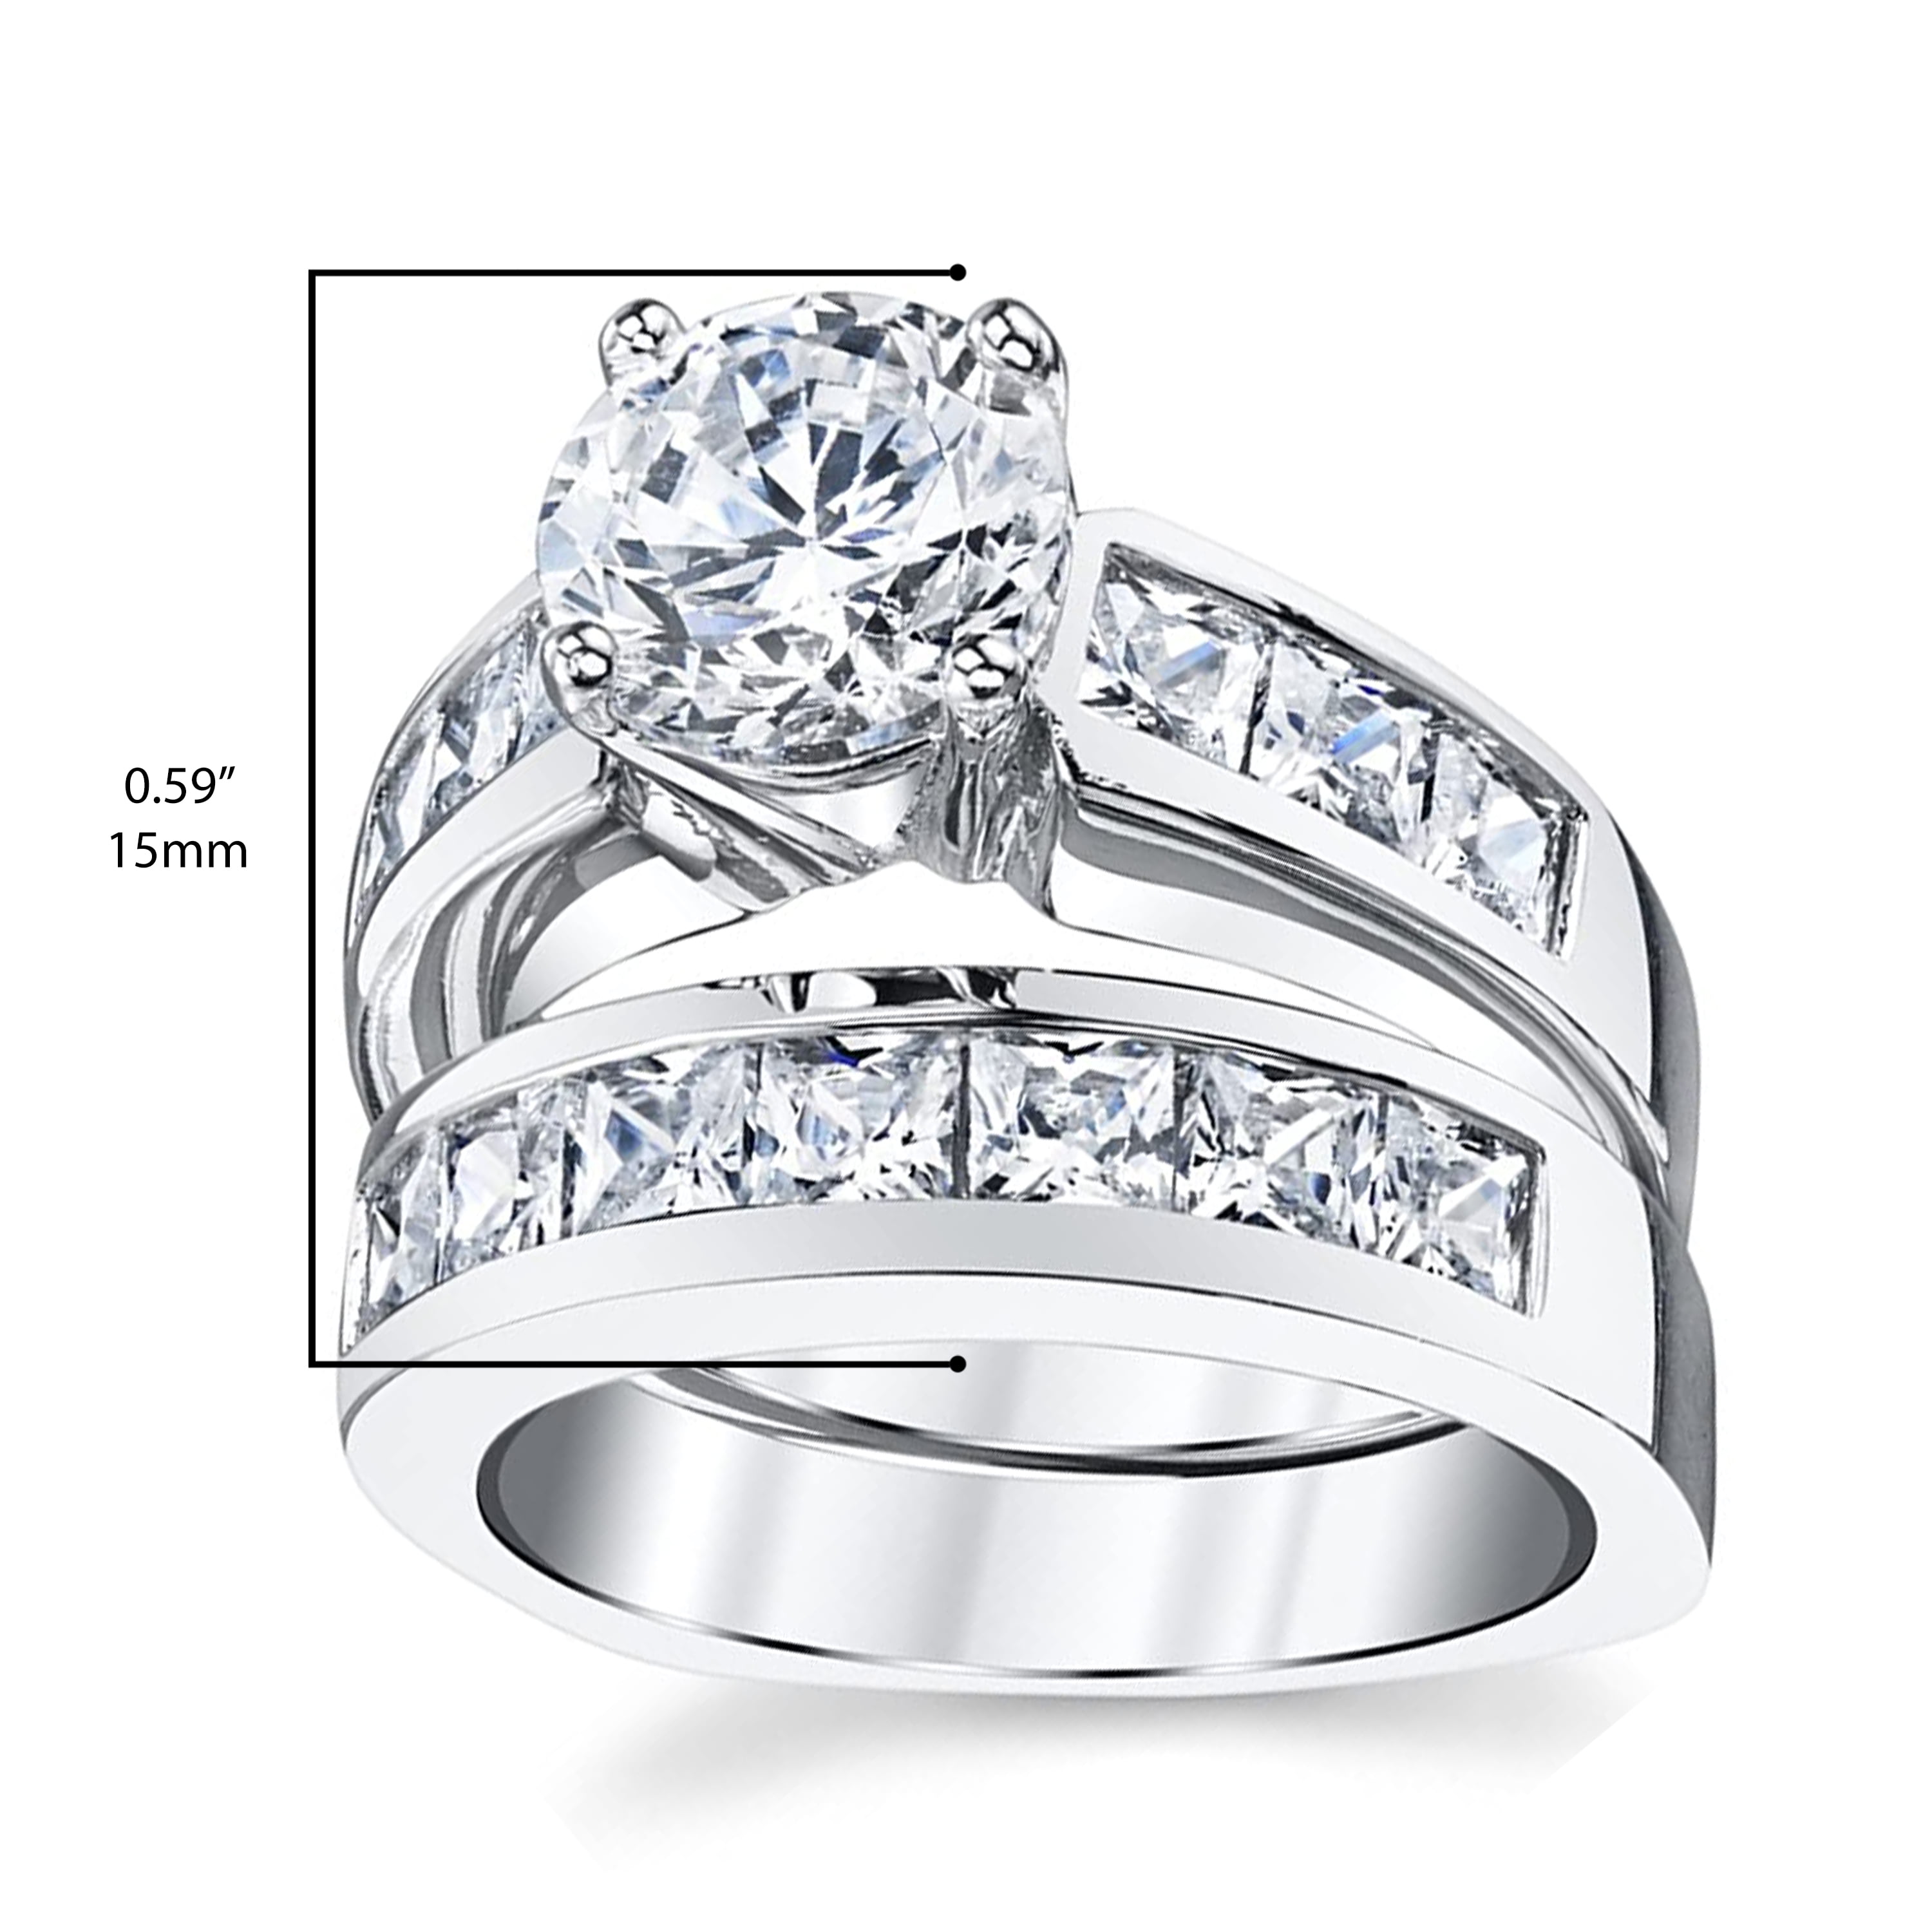 Best Quality Free Gift Box Sterling Silver CZ 3 Piece Wedding Set Ring